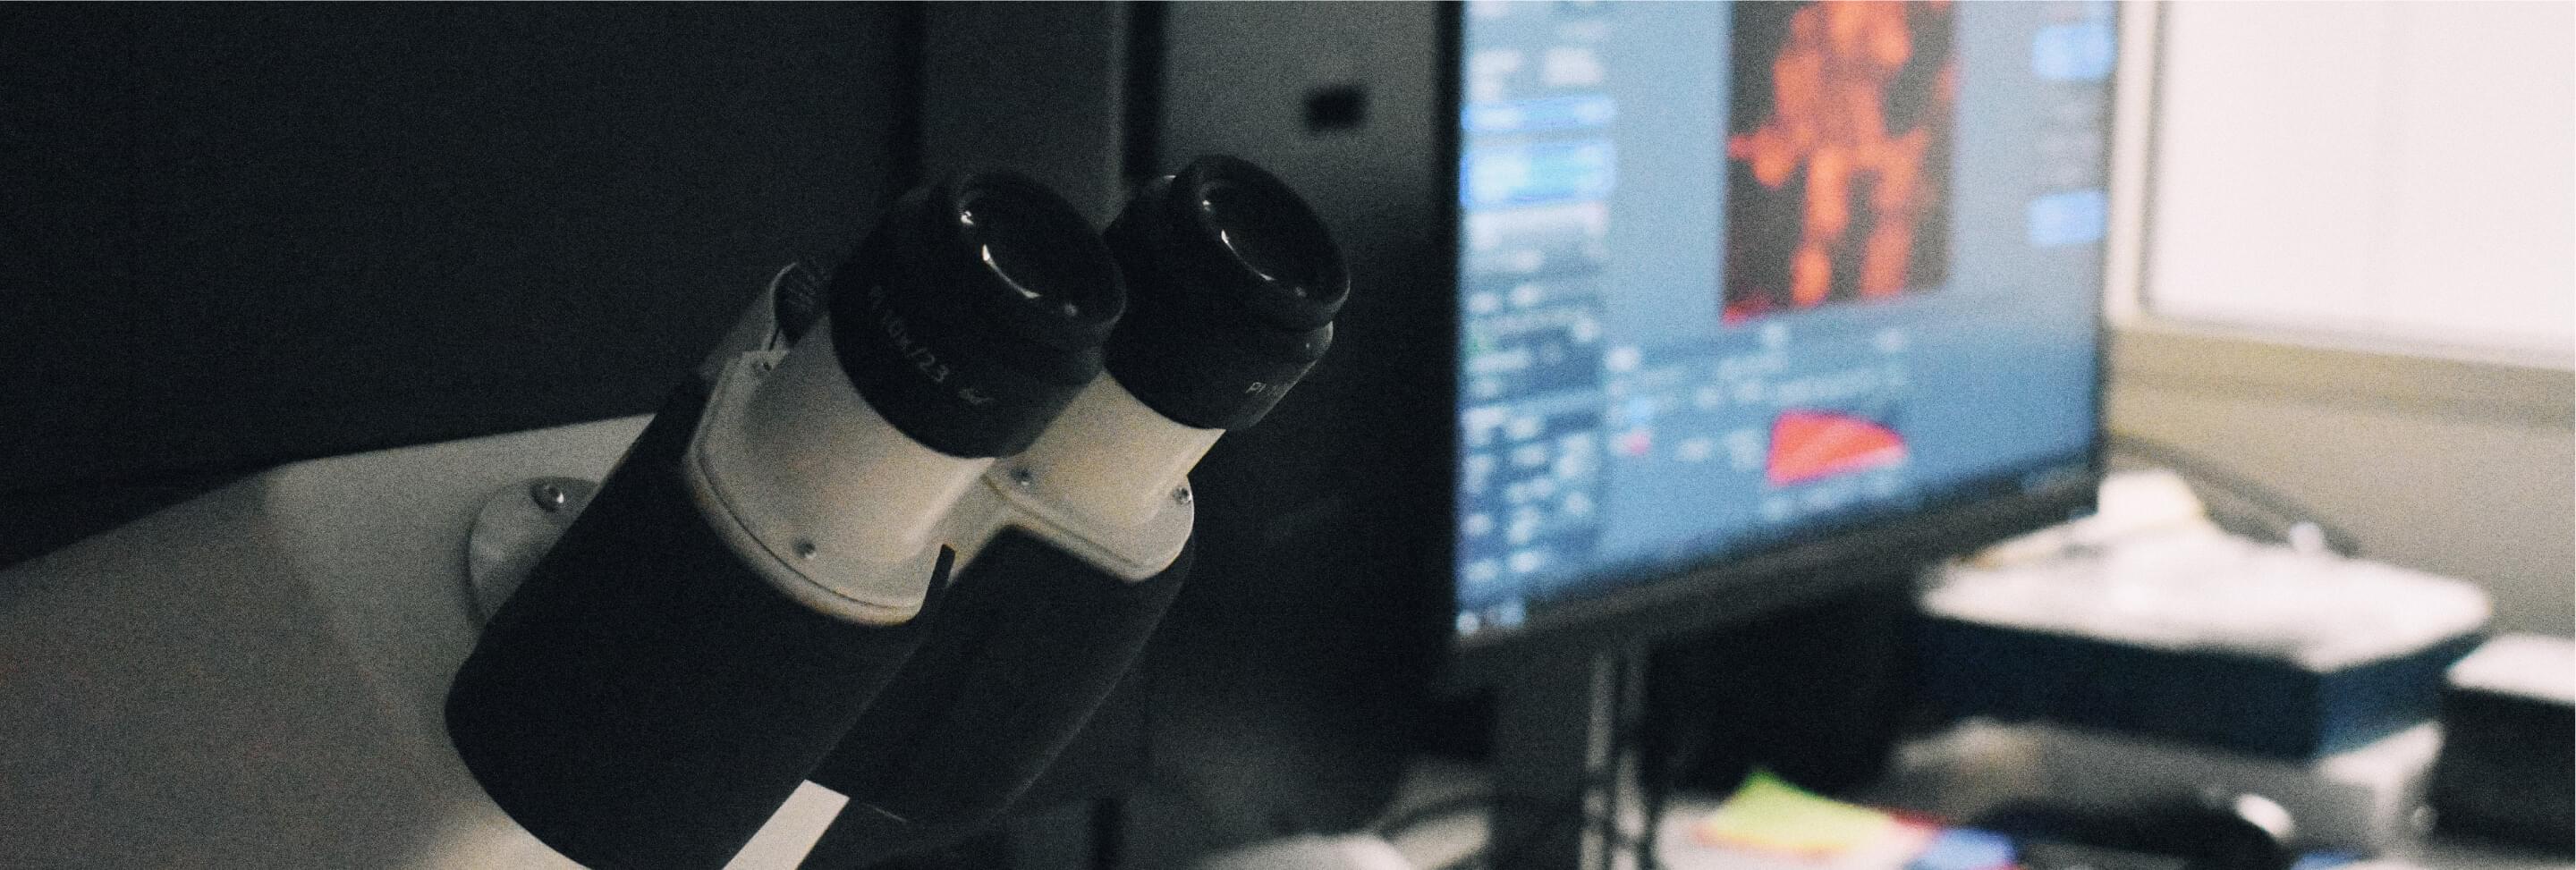 A close-up of a HiPR-FISH technology microscope.